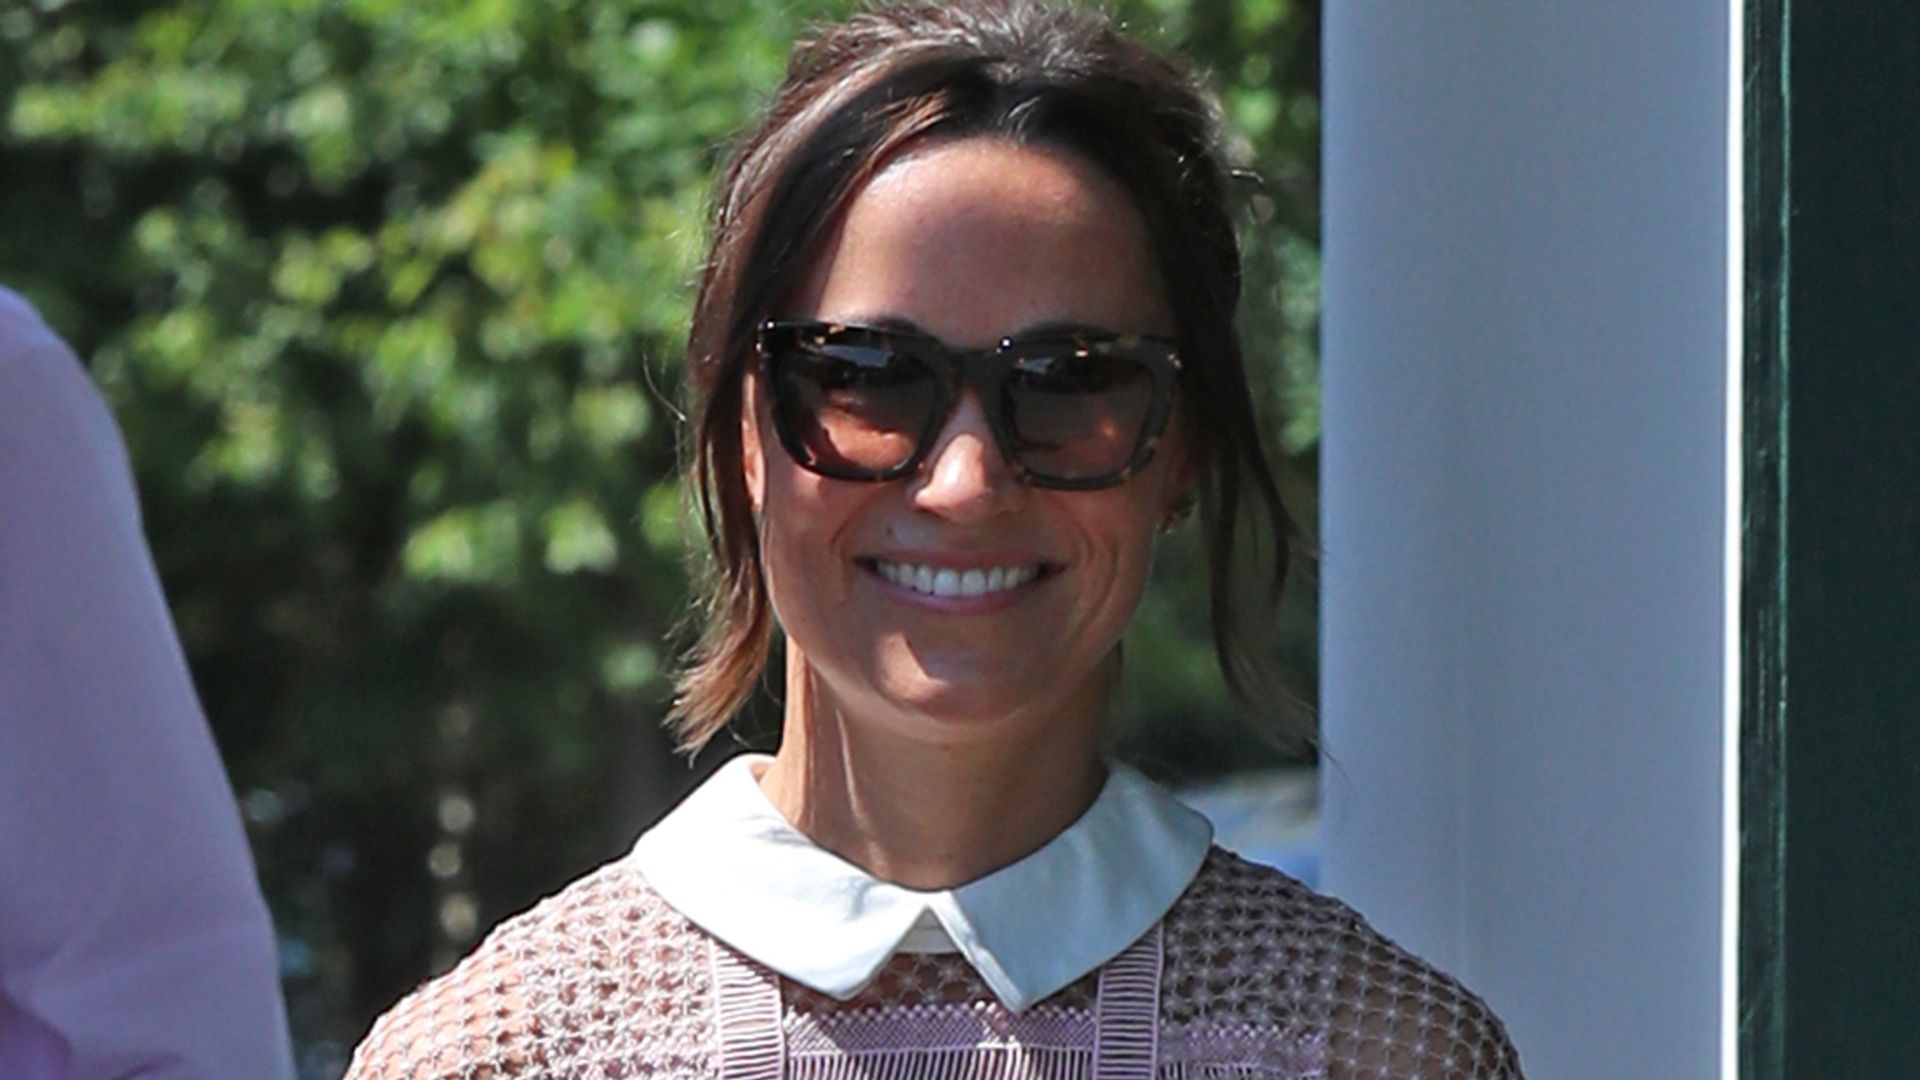 Pippa Middleton in a pink and white lace dress and sunglasses